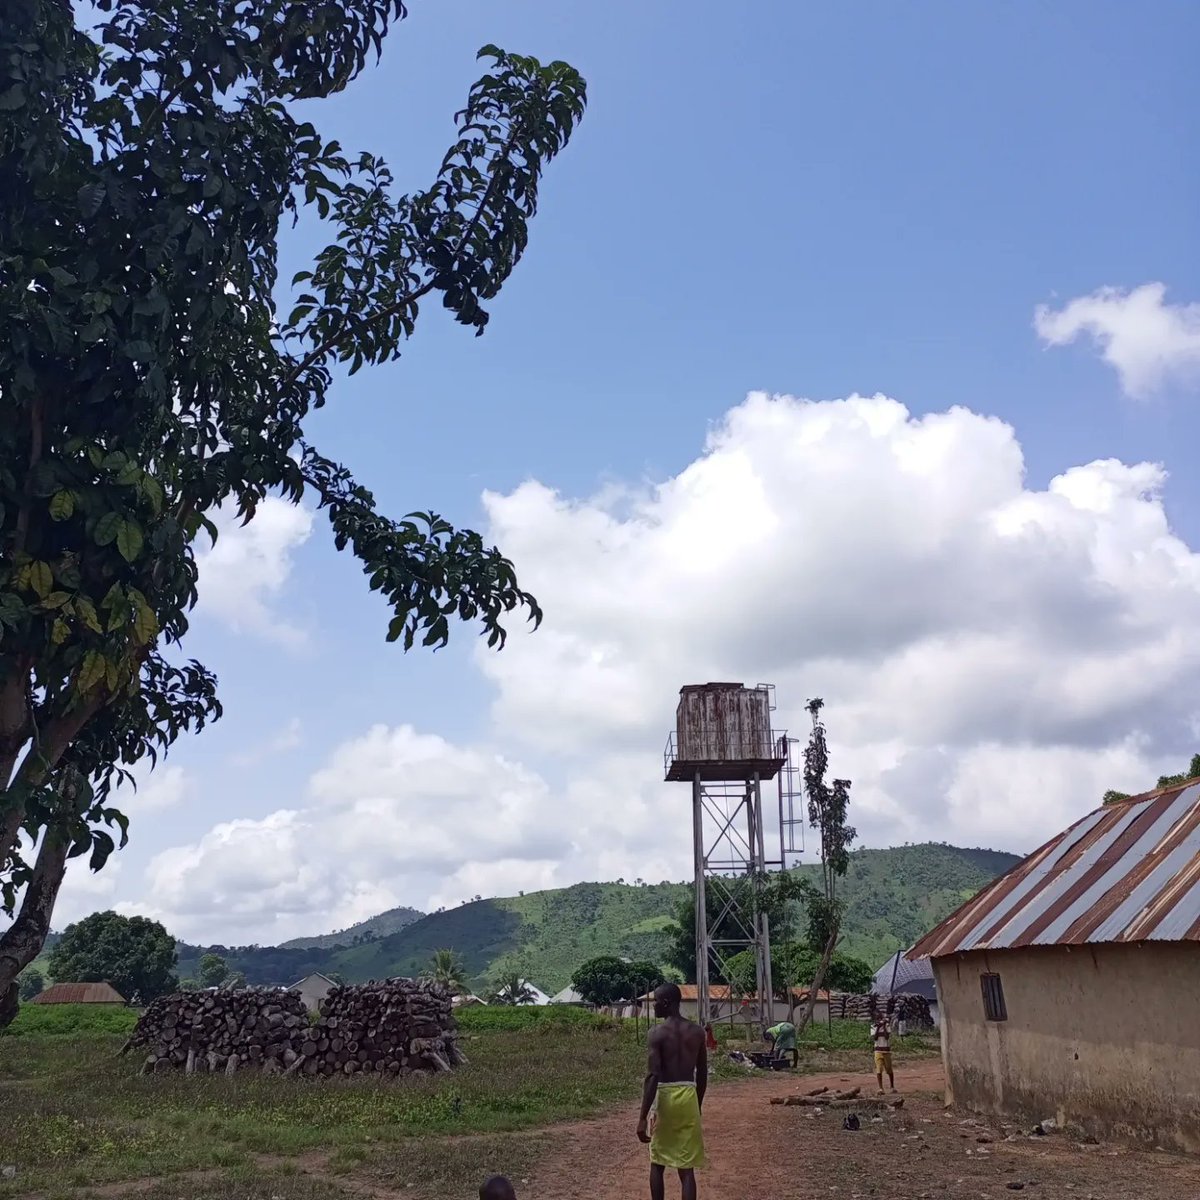 As a Community and Field Officer representing WIDEF, I visited Ijah Dabuta FCT to assess community needs. Key findings were access road challenges, water shortages, poor electricity supply, school infrastructure decay, and unemployment. We're committed to making a positive impact